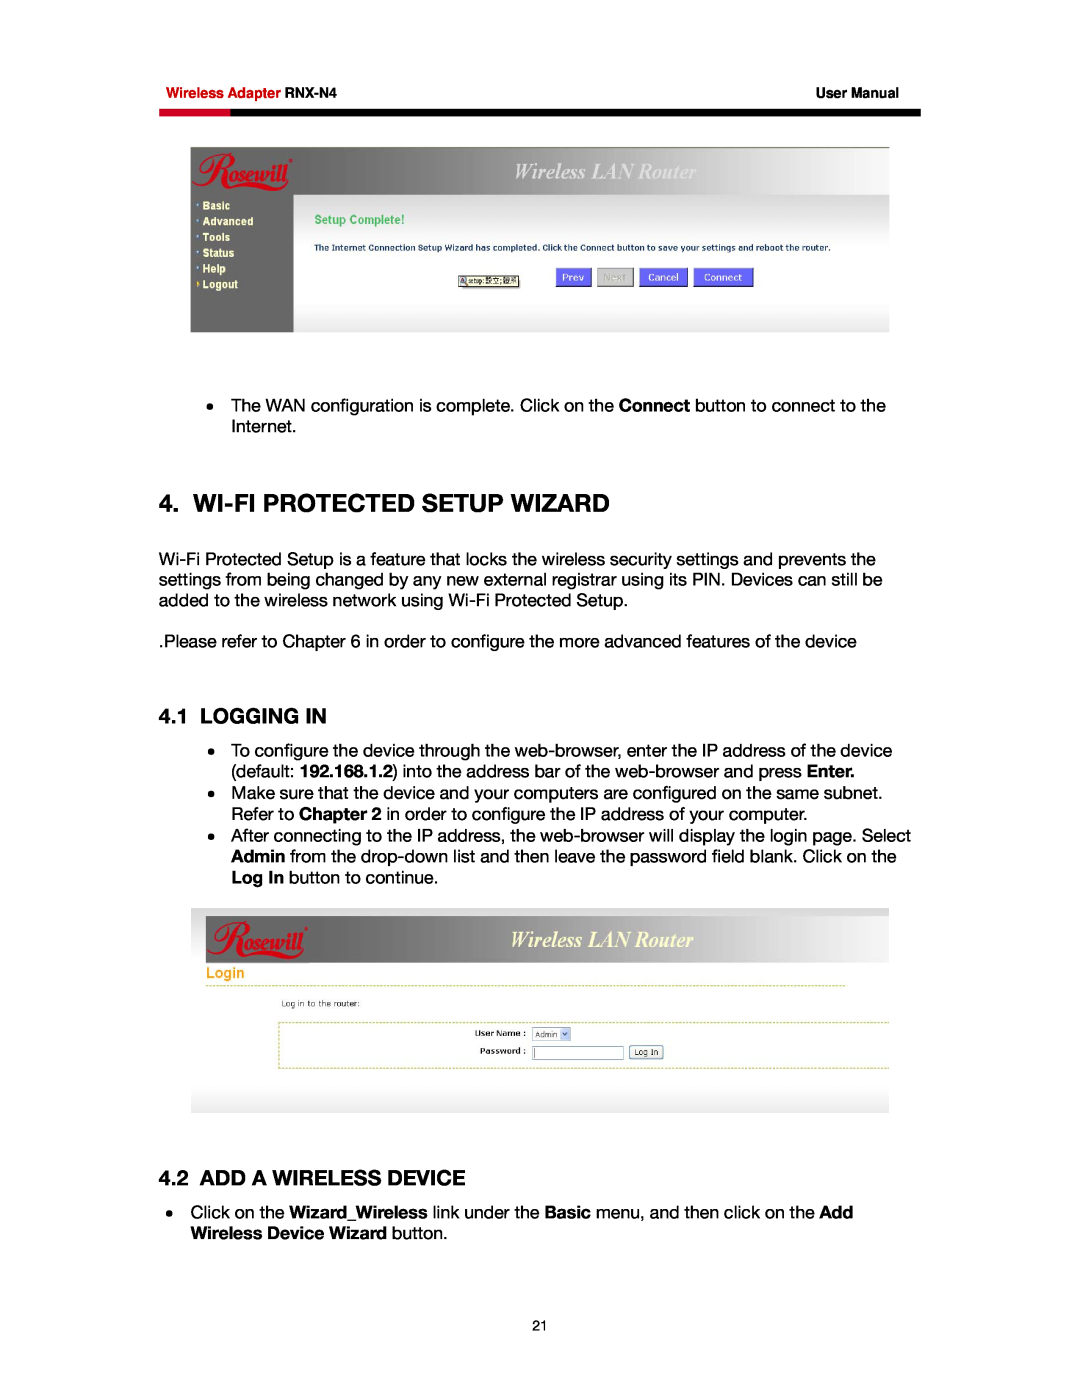 Rosewill RNX-N4 user manual Wi-Fi Protected Setup Wizard, Logging In, Add A Wireless Device 